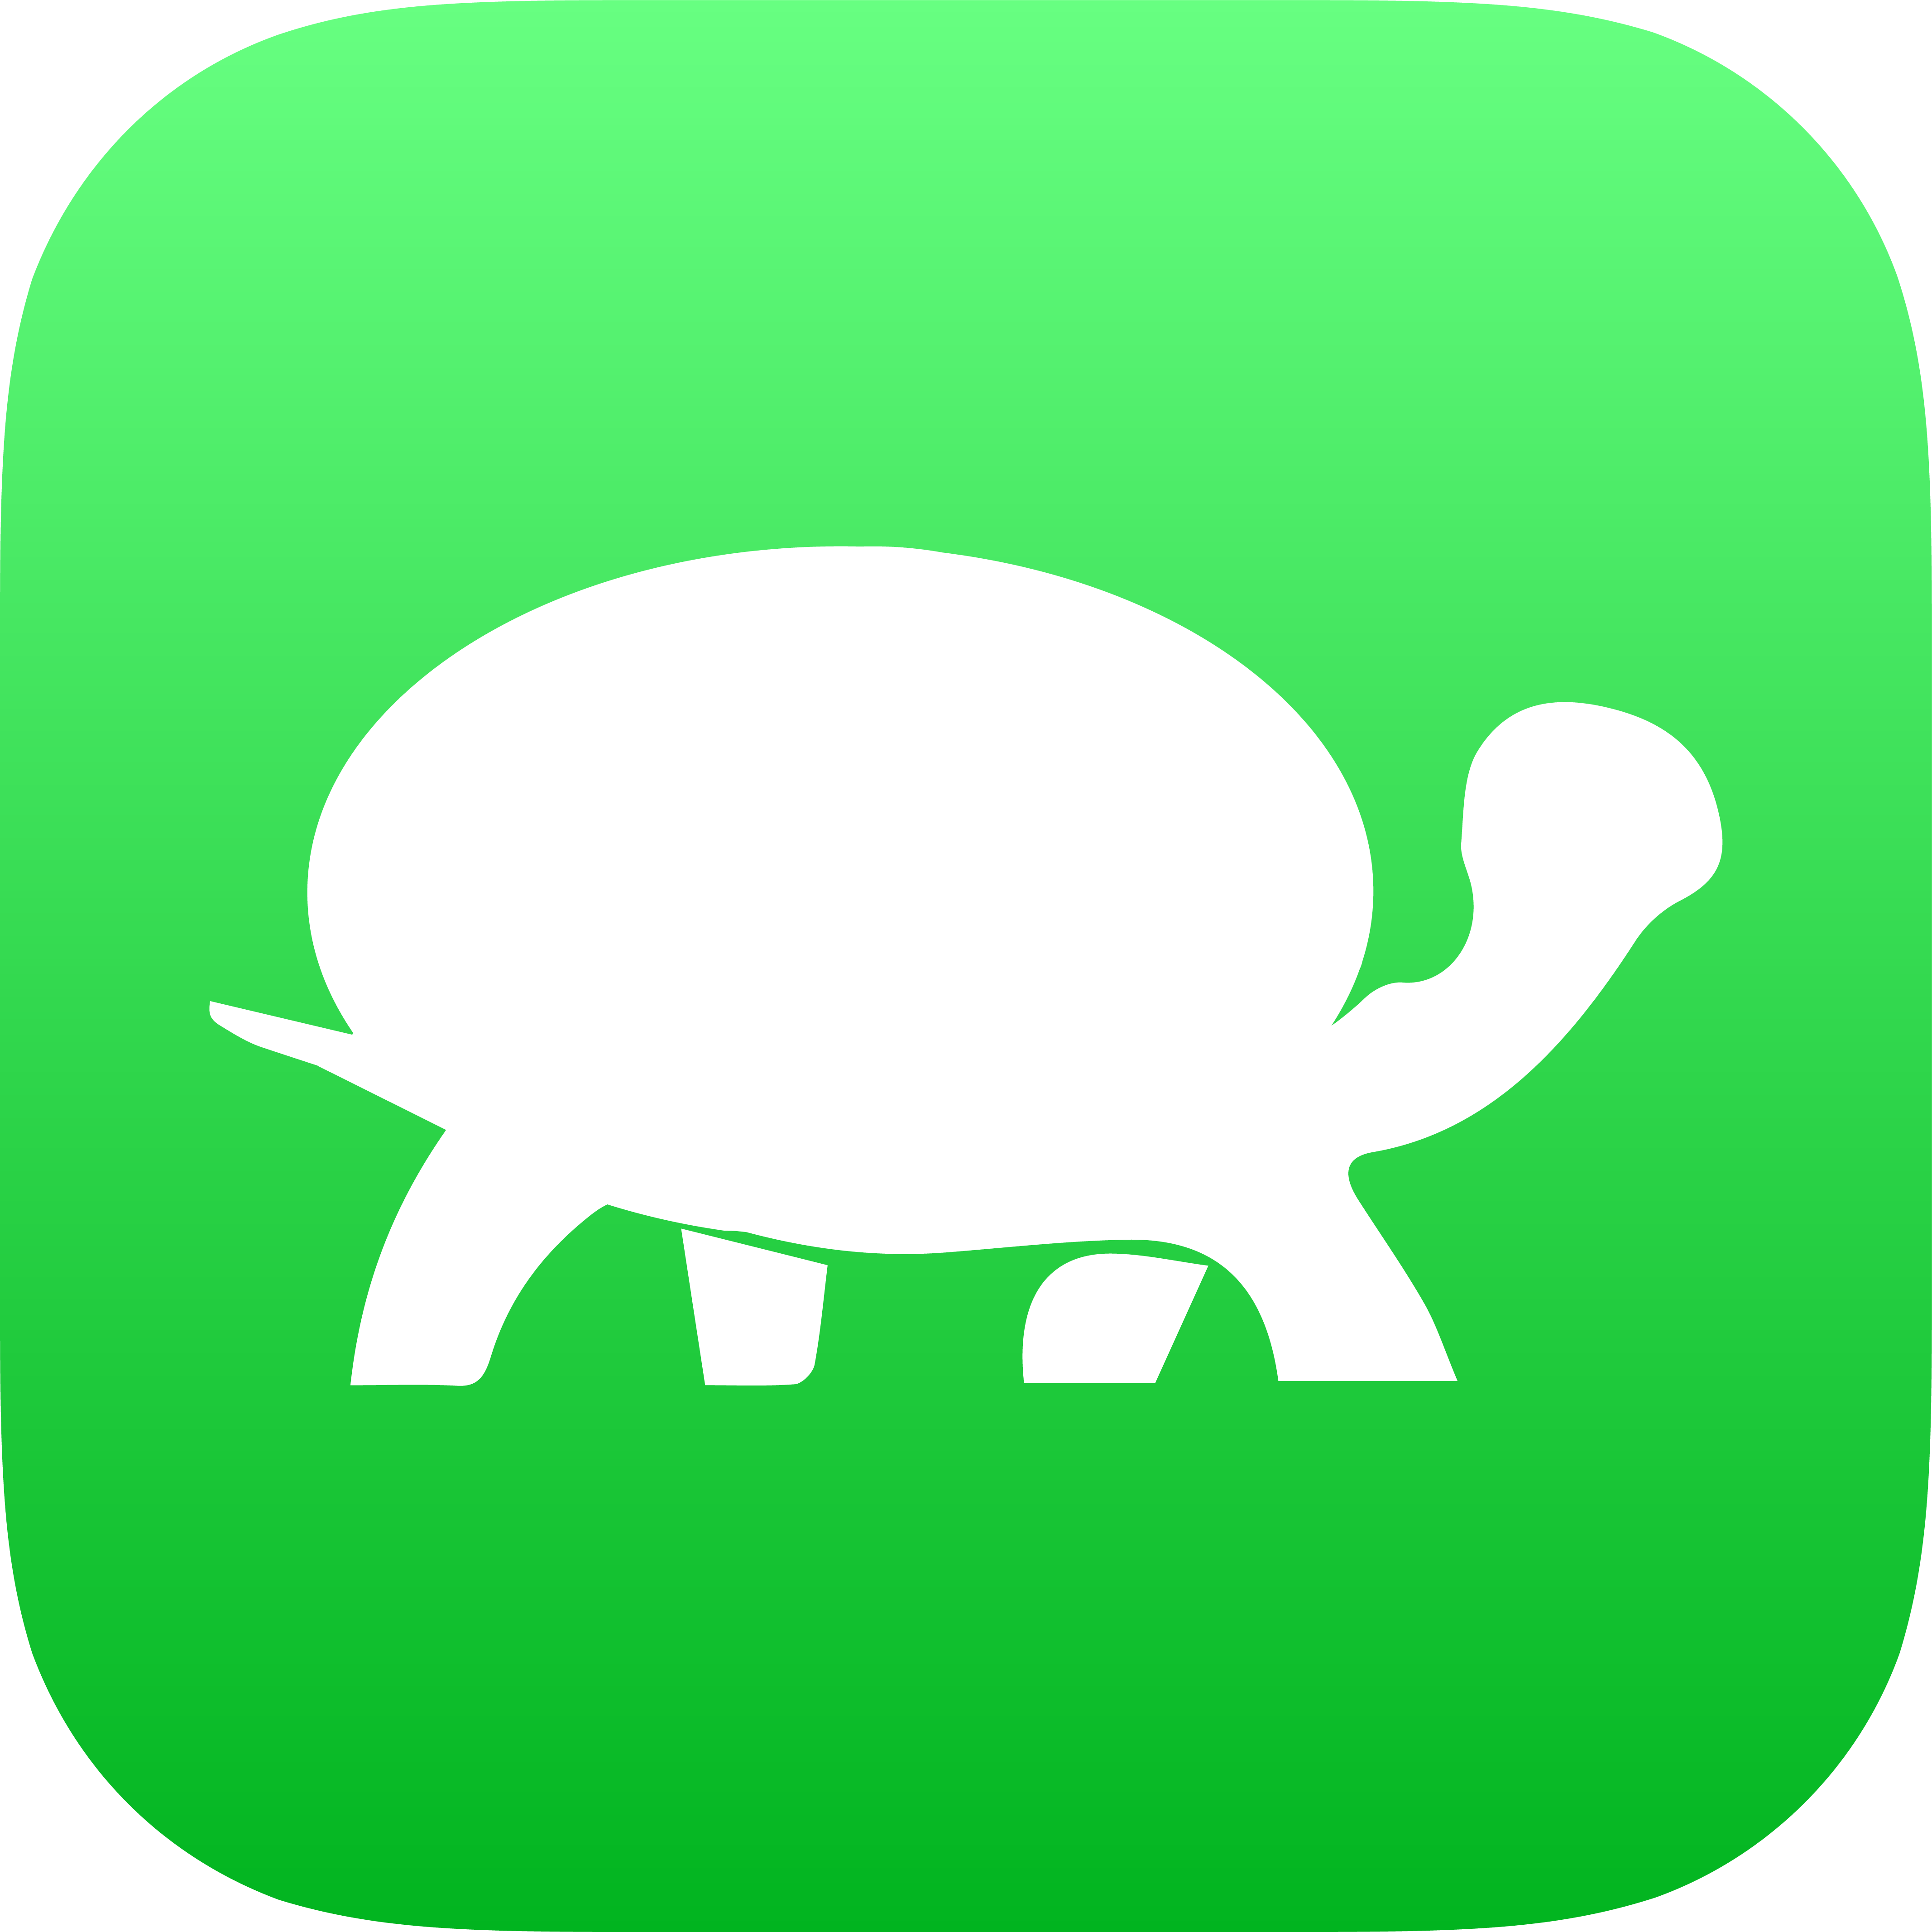 the Messages icon, but it's a turtle instead of a text bubble